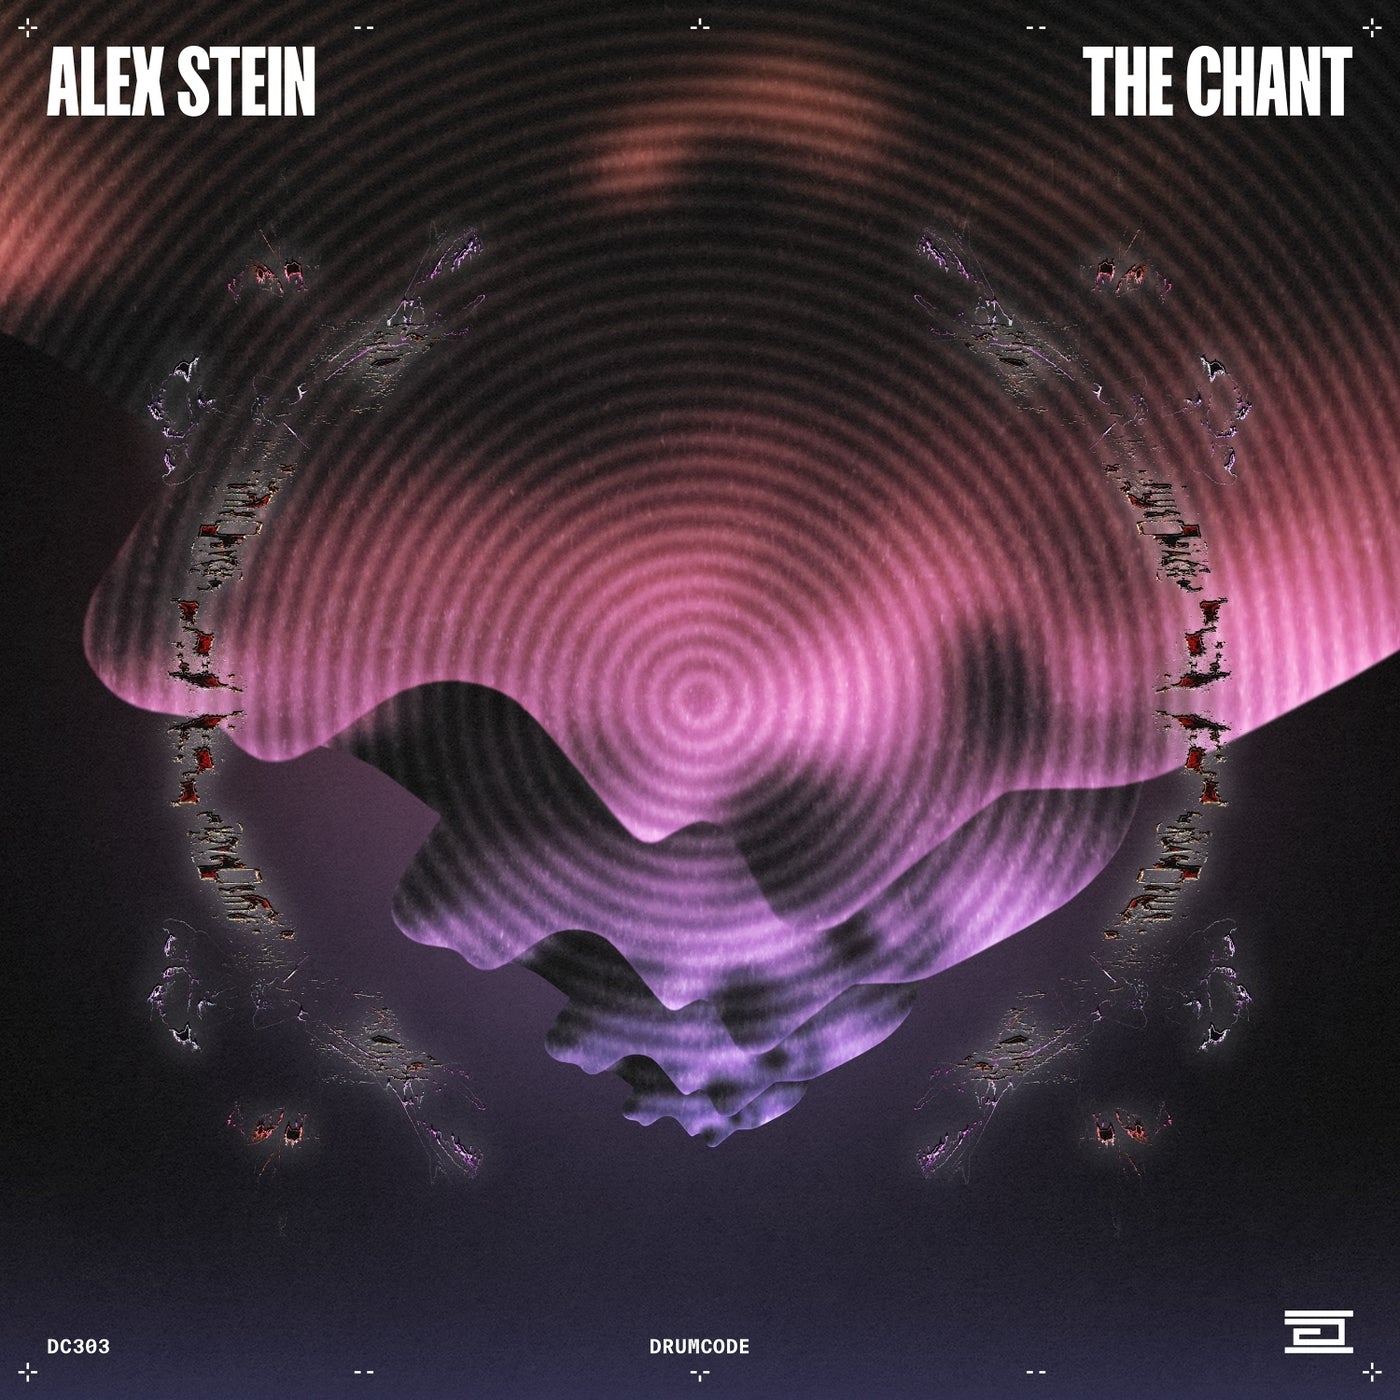 image cover: Alex Stein - The Chant on Drumcode